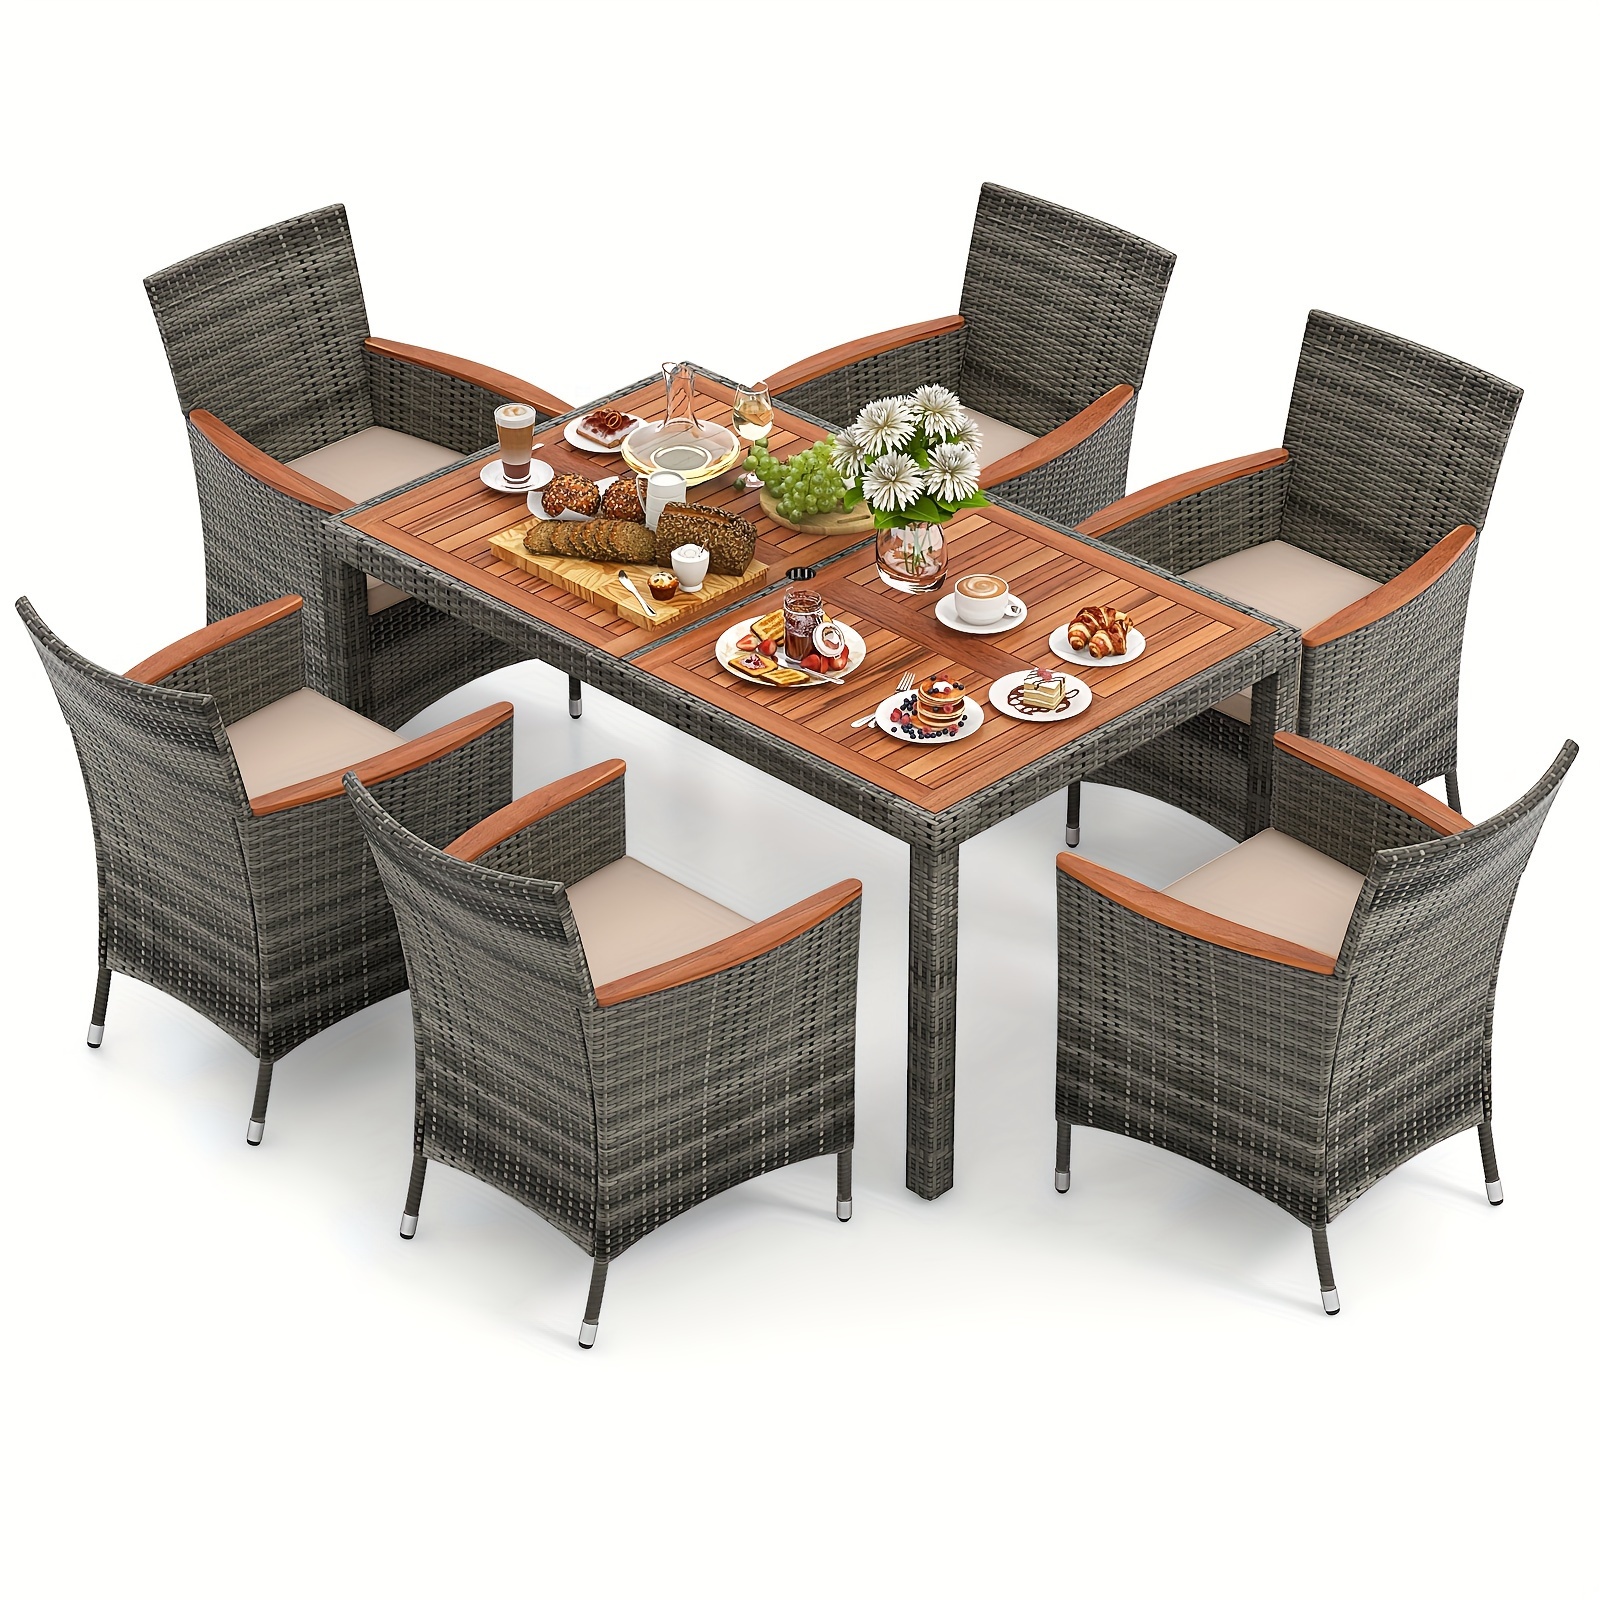 

7 Pieces Outdoor Wicker Dining Set With Acacia Wood Table And 6 Armchairs